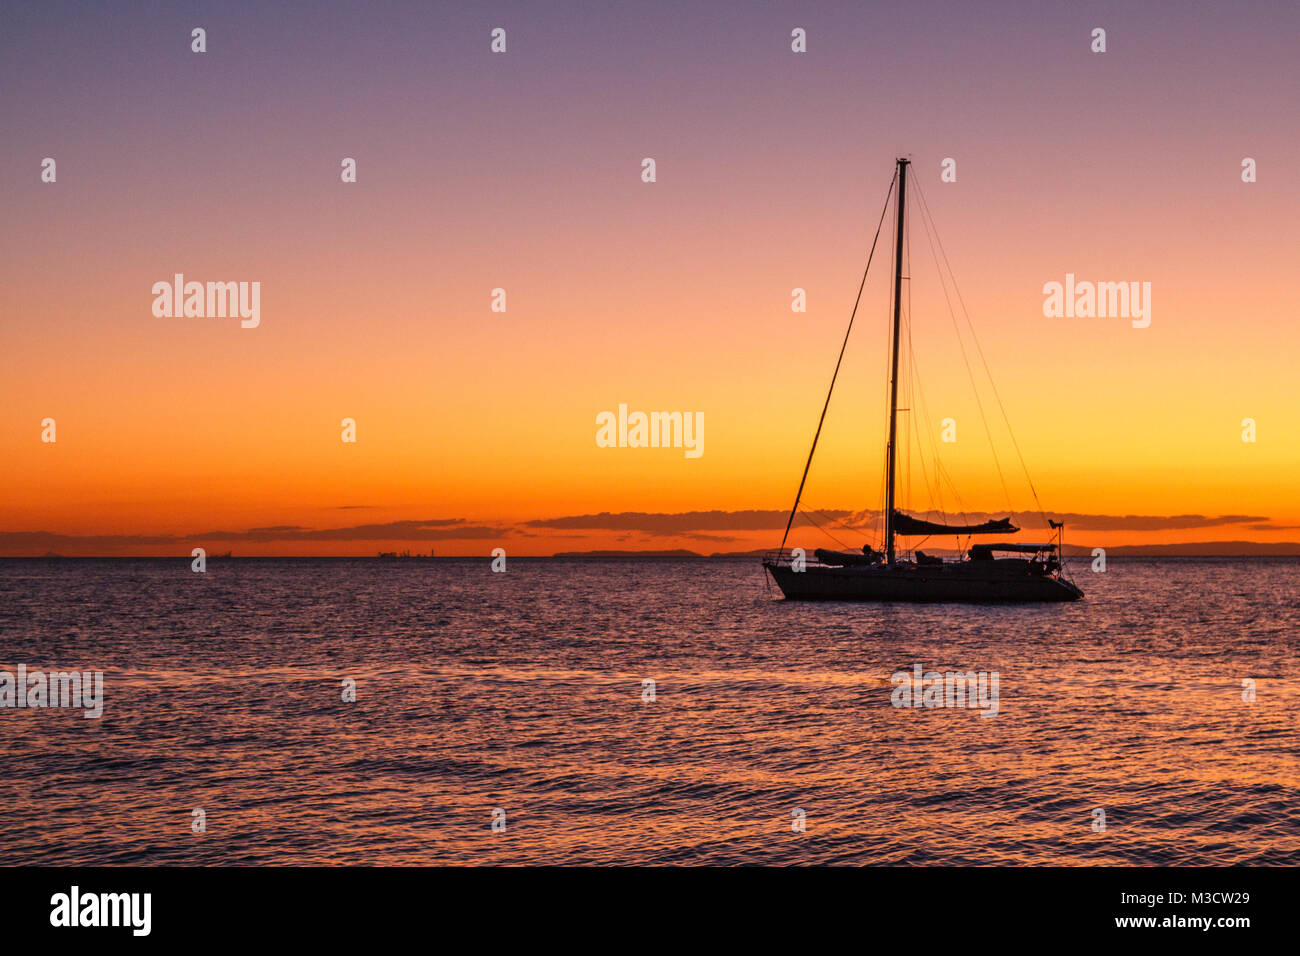 Silhouette of yacht at sunset at Moreton Bay, Queensland, Australia Stock Photo